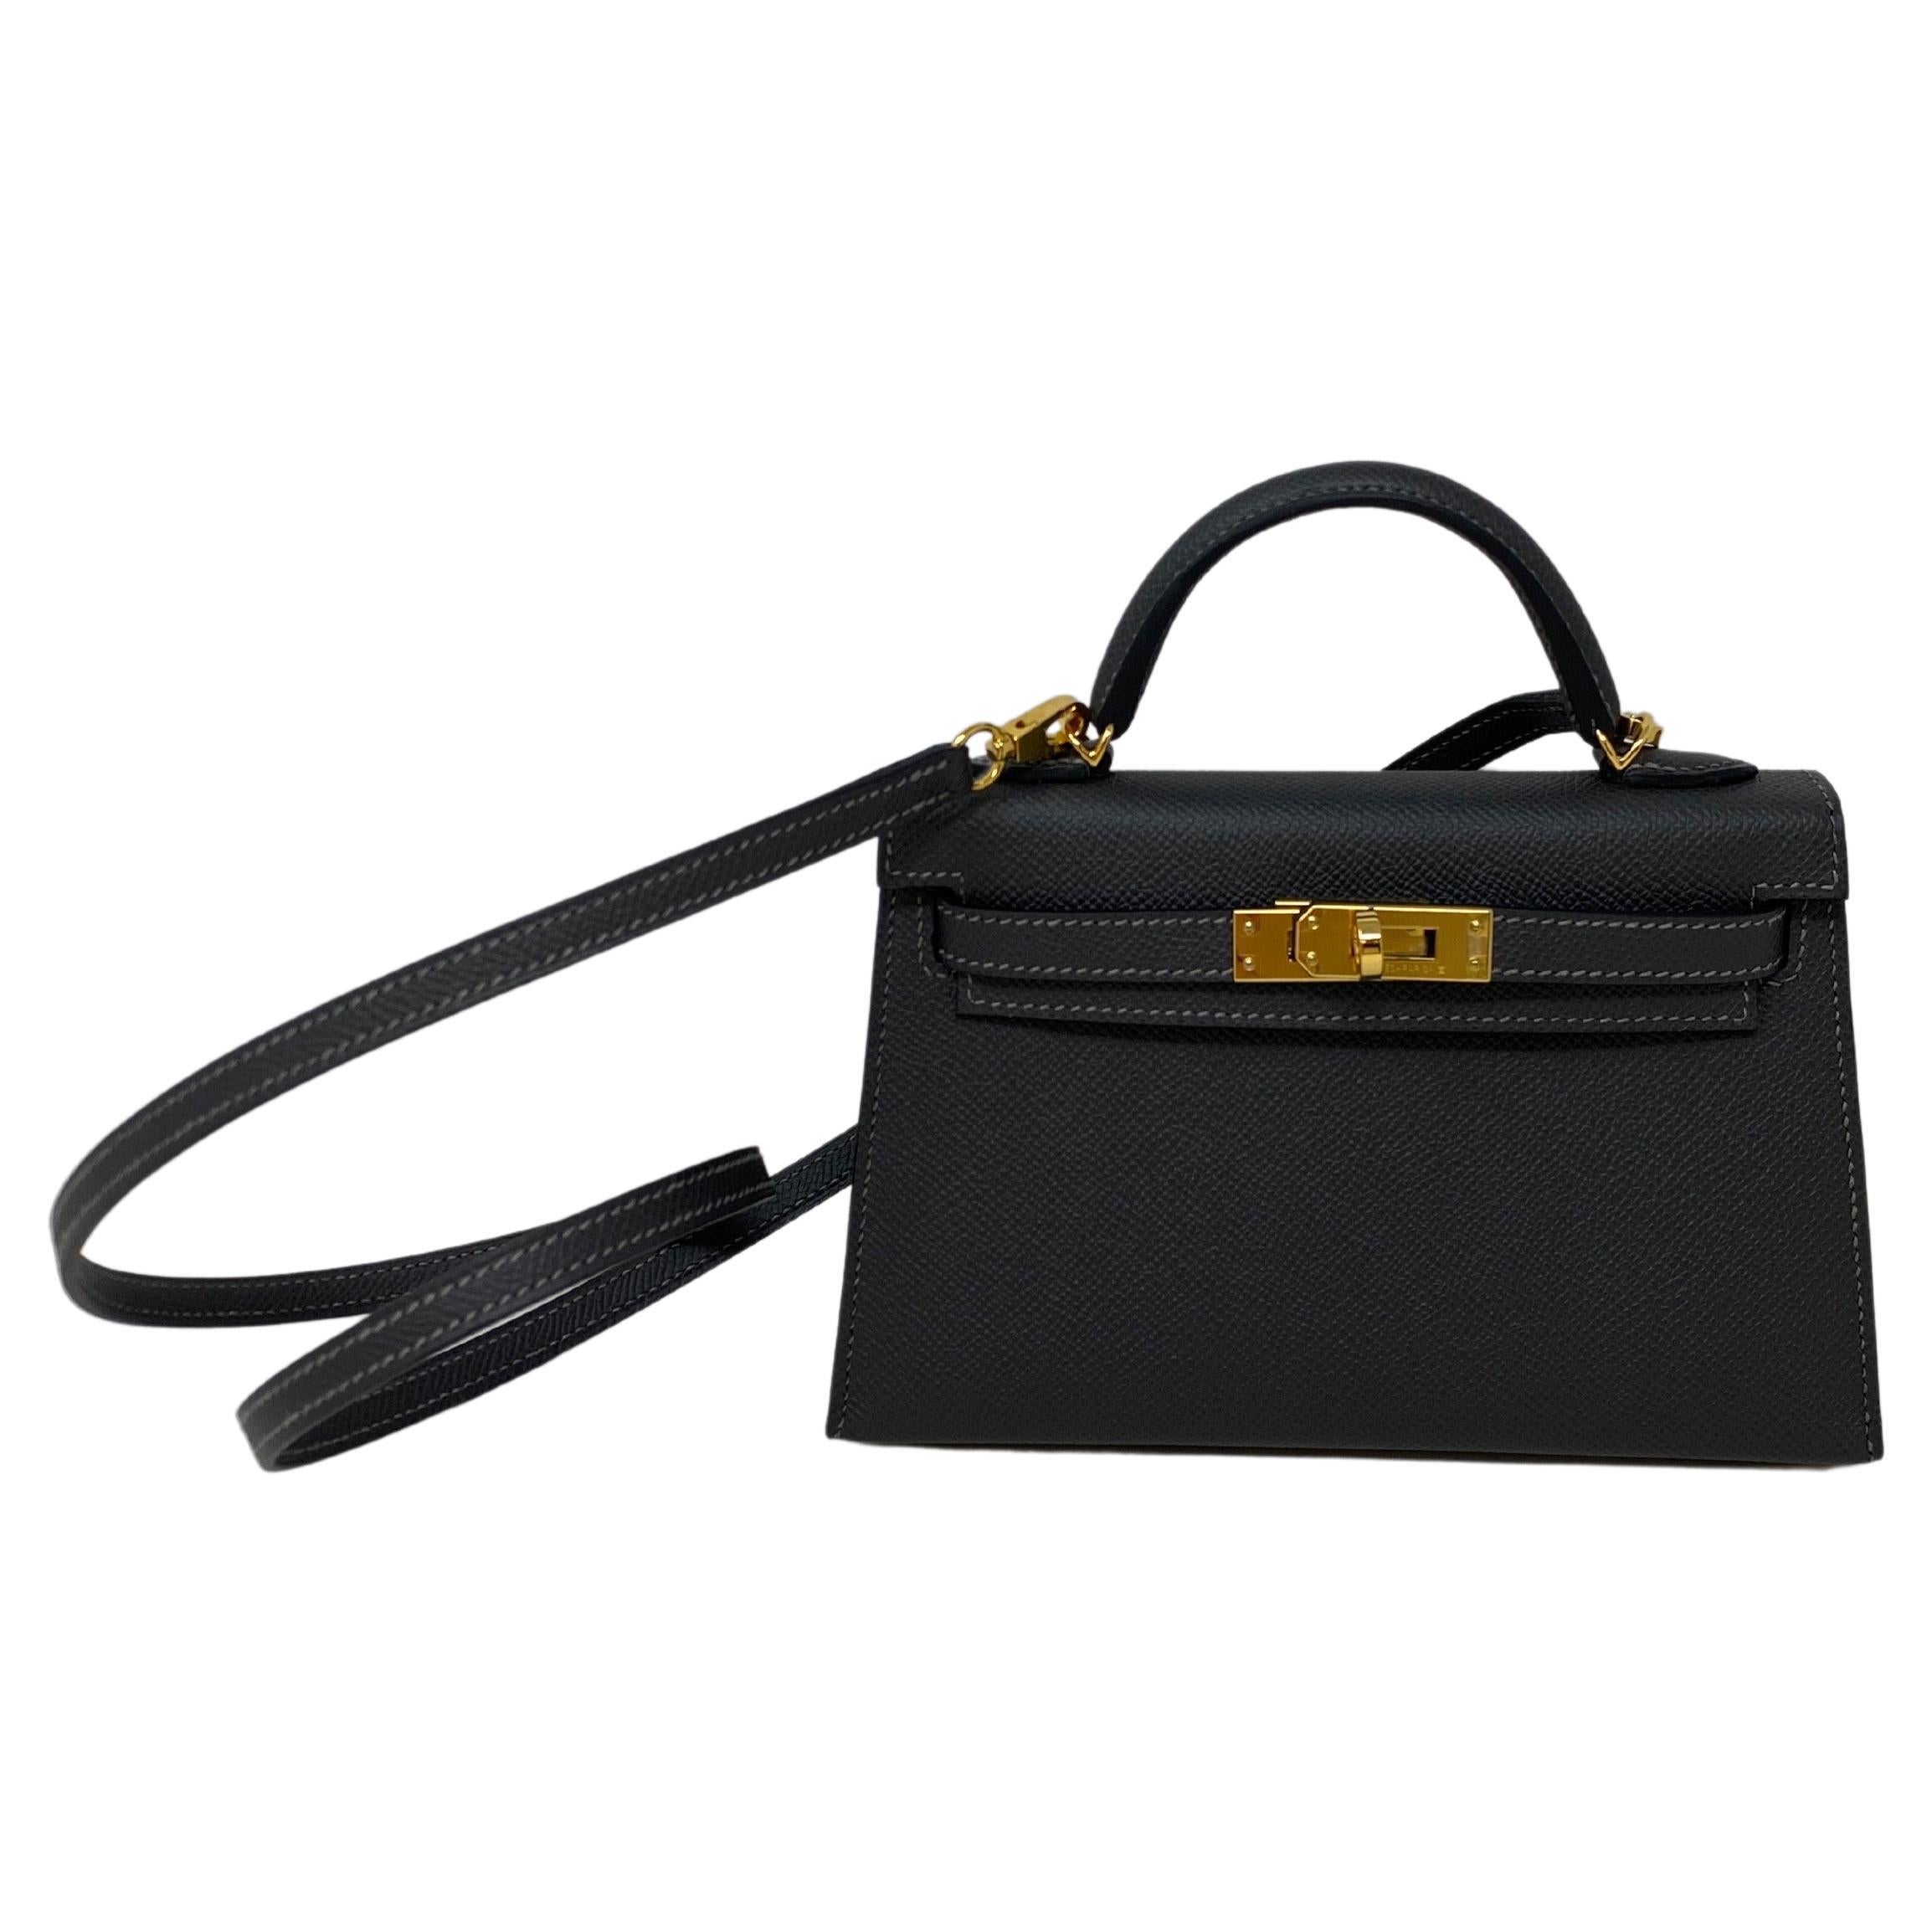 Hermes Graphite Mini Kelly Bag. Brand new mini Kelly. Gorgeous dark grey color. Very nice neutral color. Looks almost black. Gold hardware. The most wanted and rare mini size. The unicorn for Hermes right now. Such a rare piece do not miss out. Full